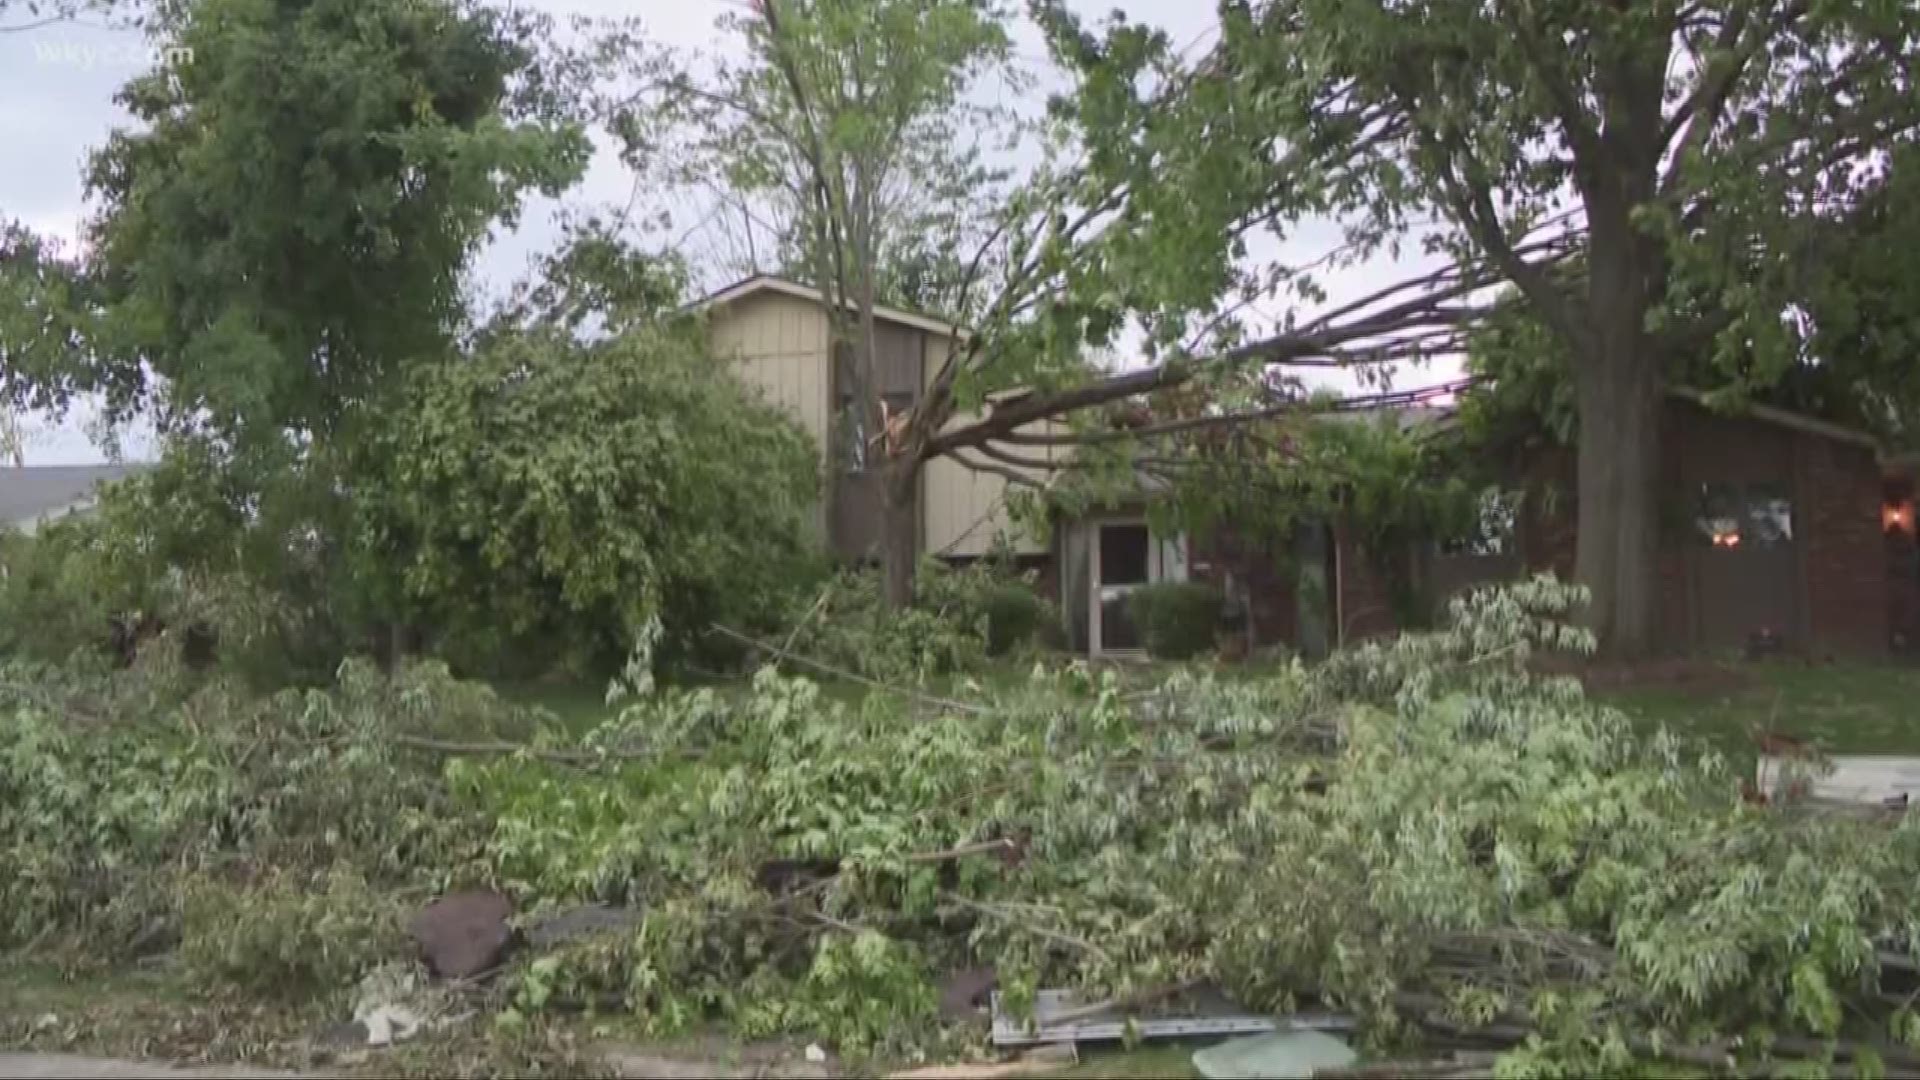 Ohio tornado victims are picking up the pieces